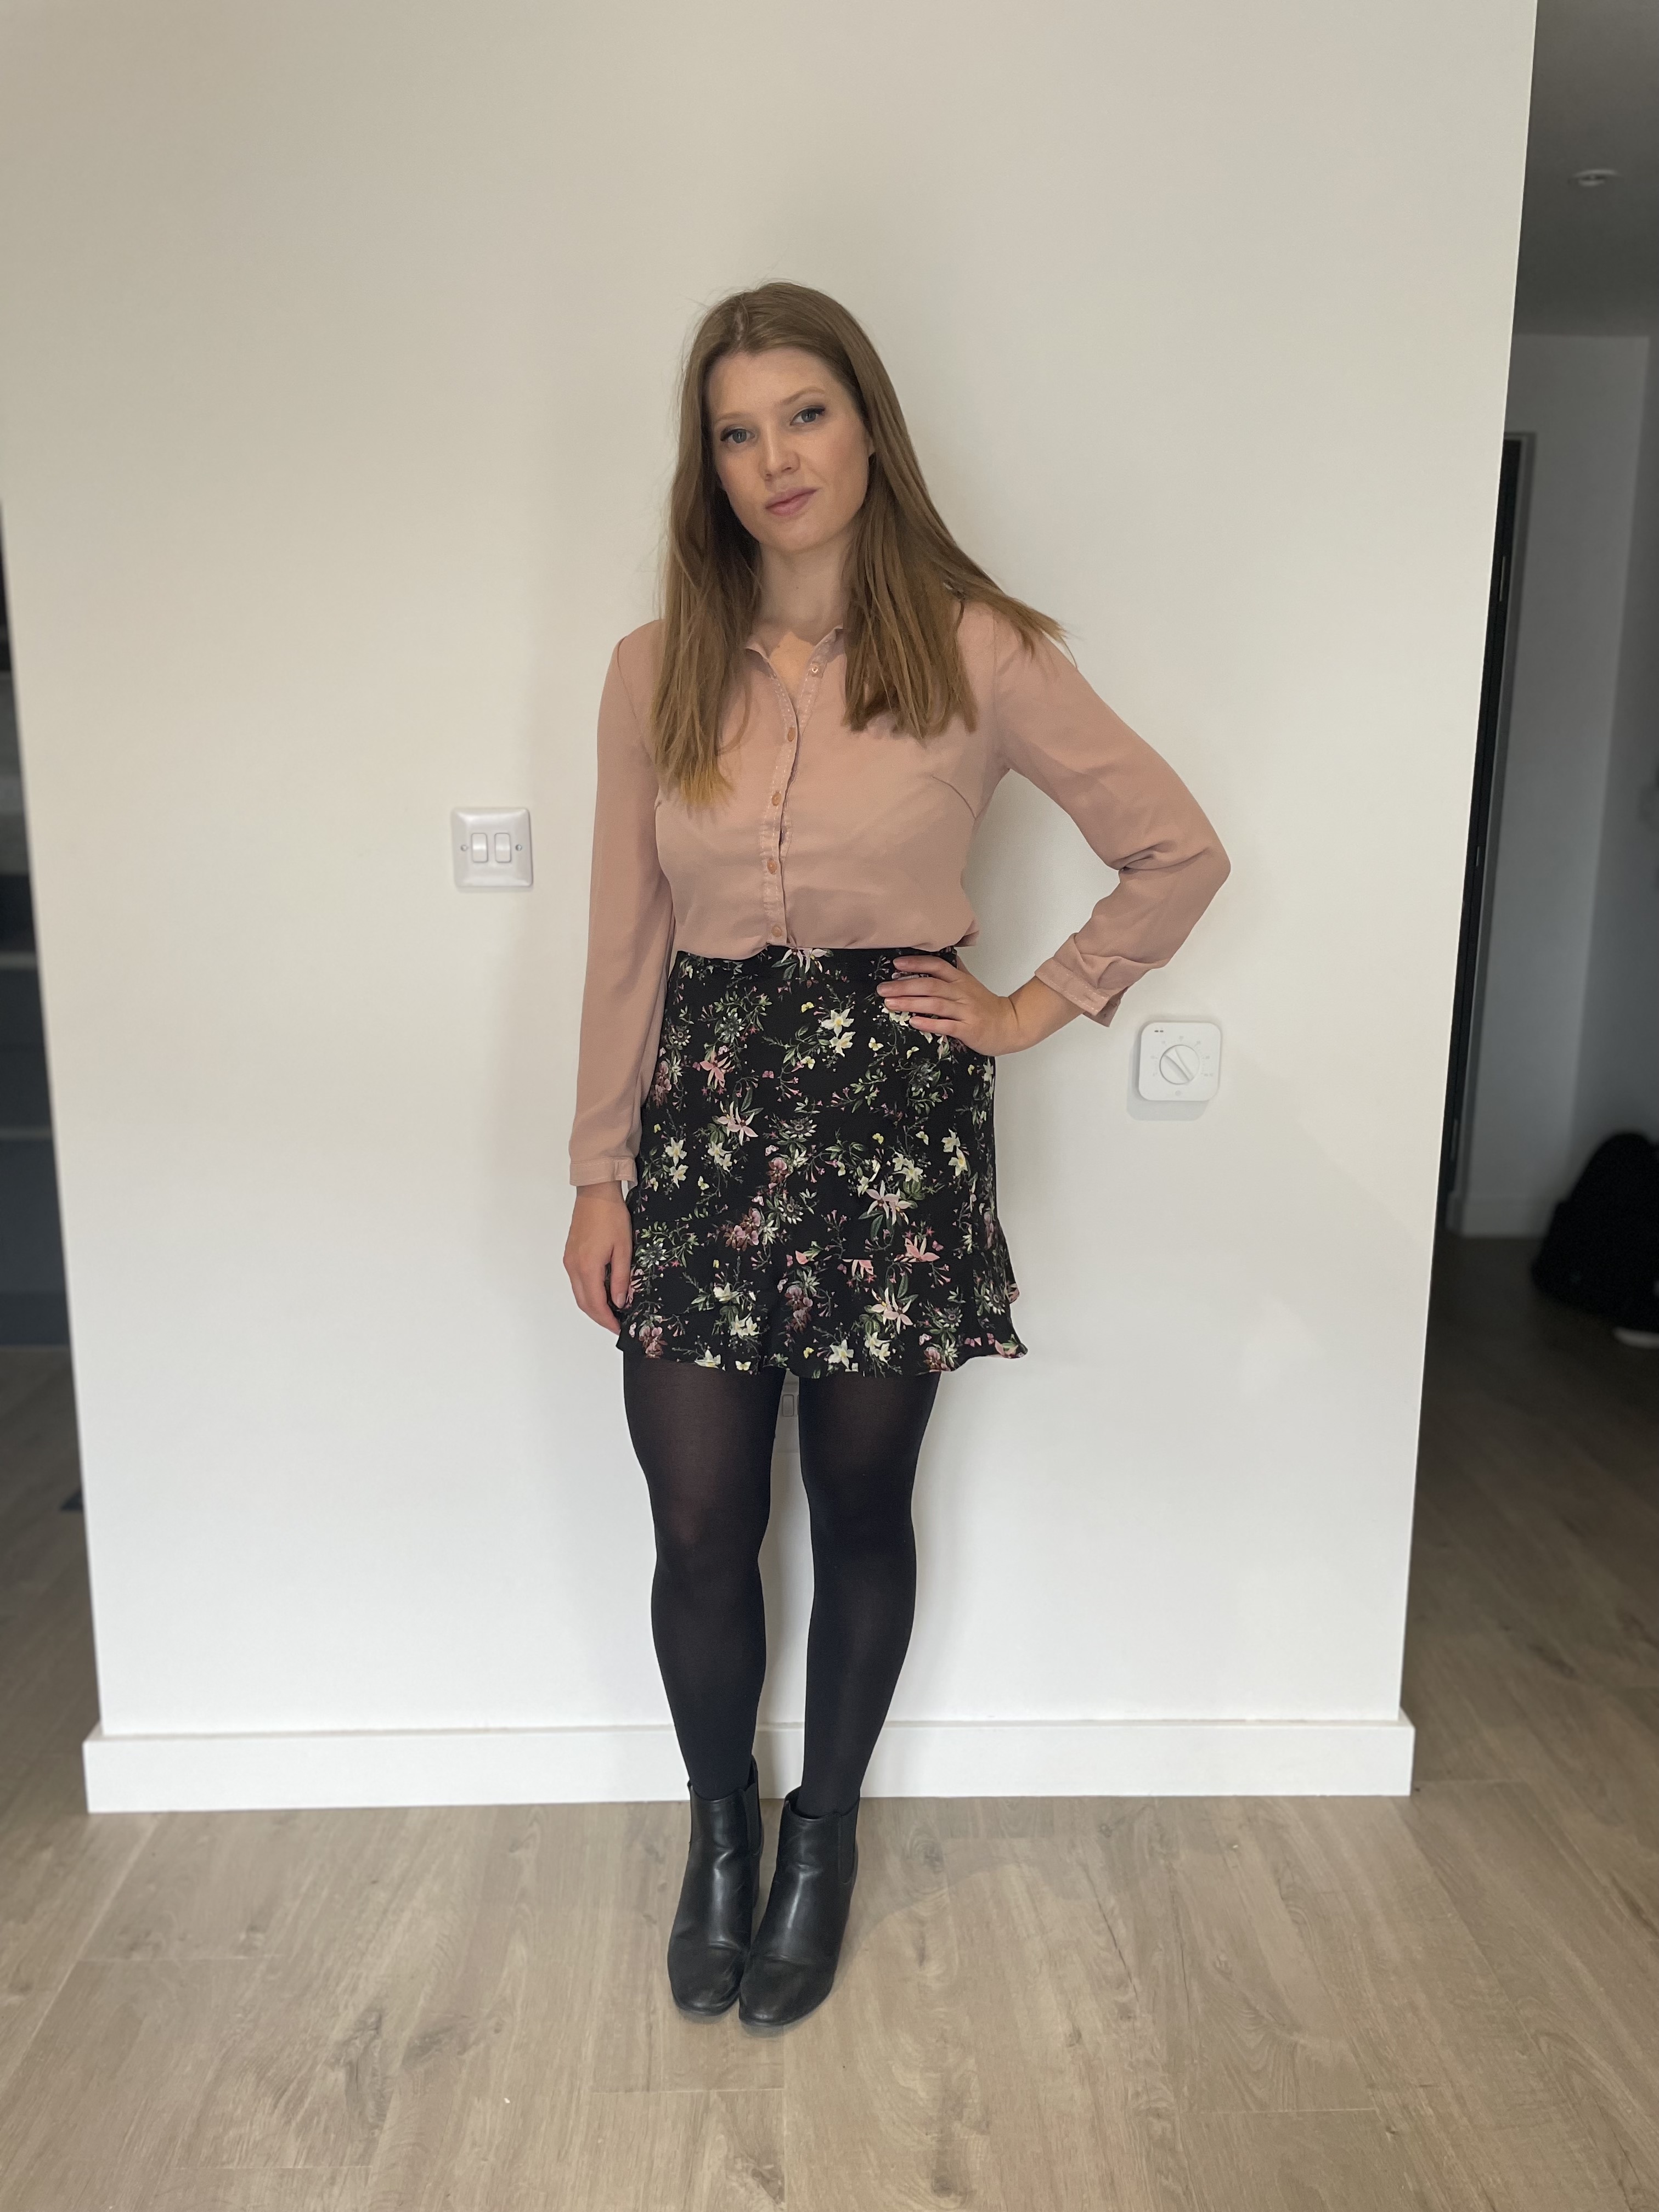 Outfit is a short floral skirt with black tights, black heeled boots and a pale pink shirt.